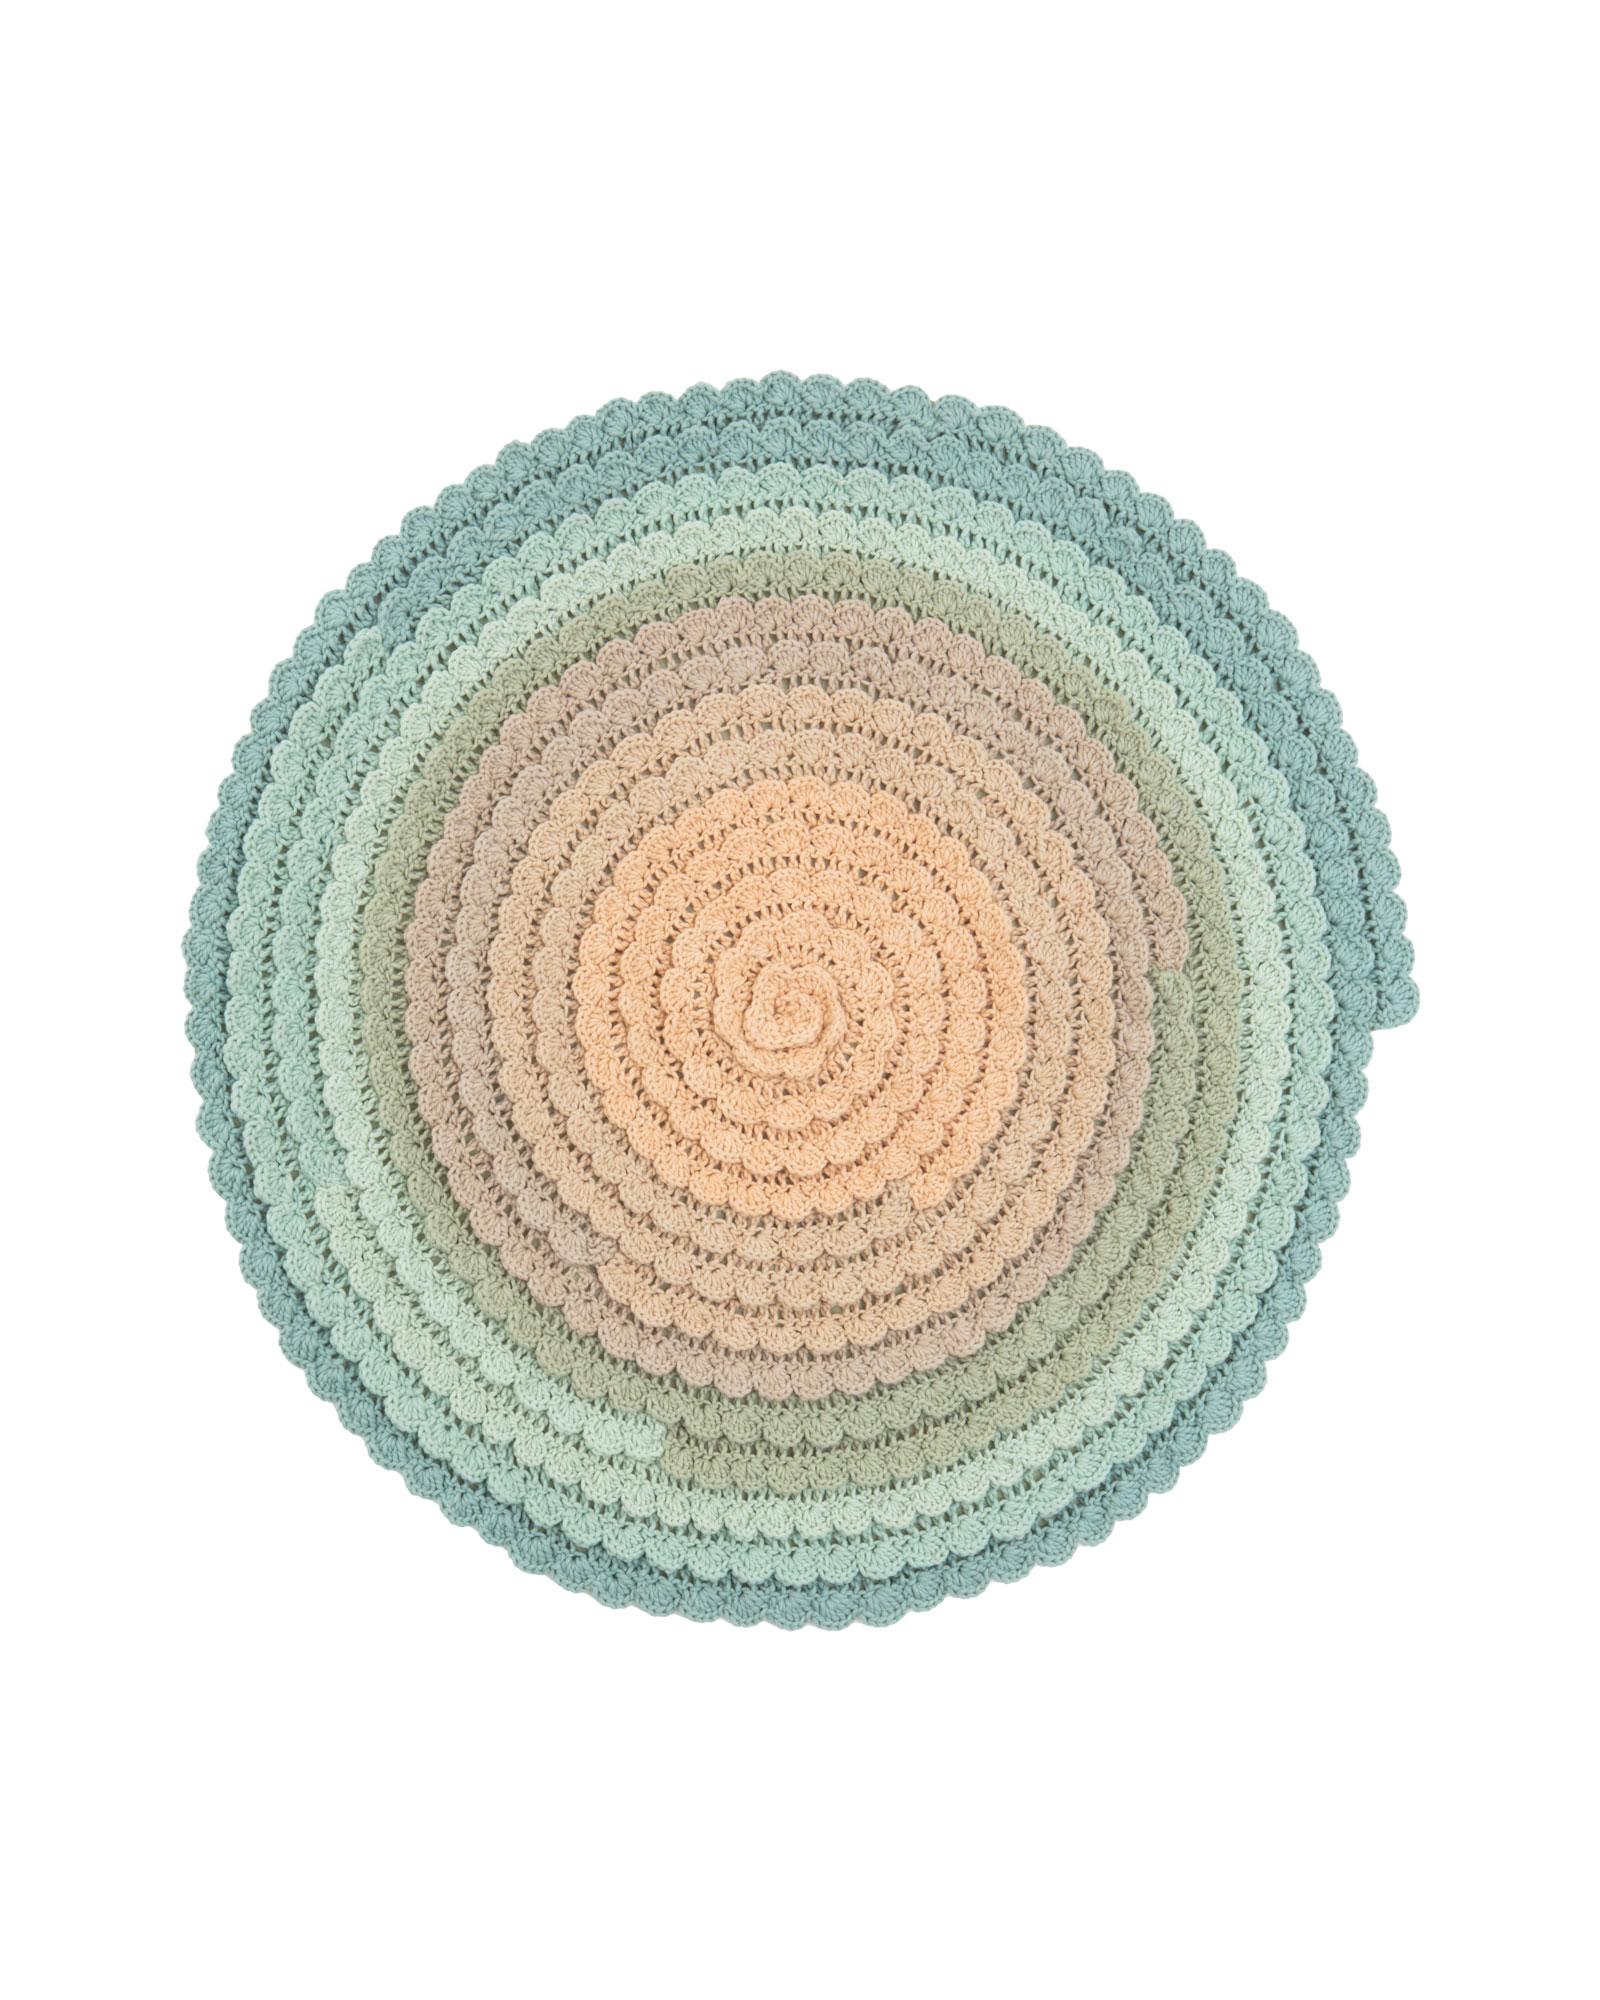 The Swirl Collection offers a variety of rugs inspired by the four seasons, with evocative names such as Autumn, Spring, Winter and Summer. Each rug is a unique interpretation of the nuances and feelings of each season, creating an immersive sensory